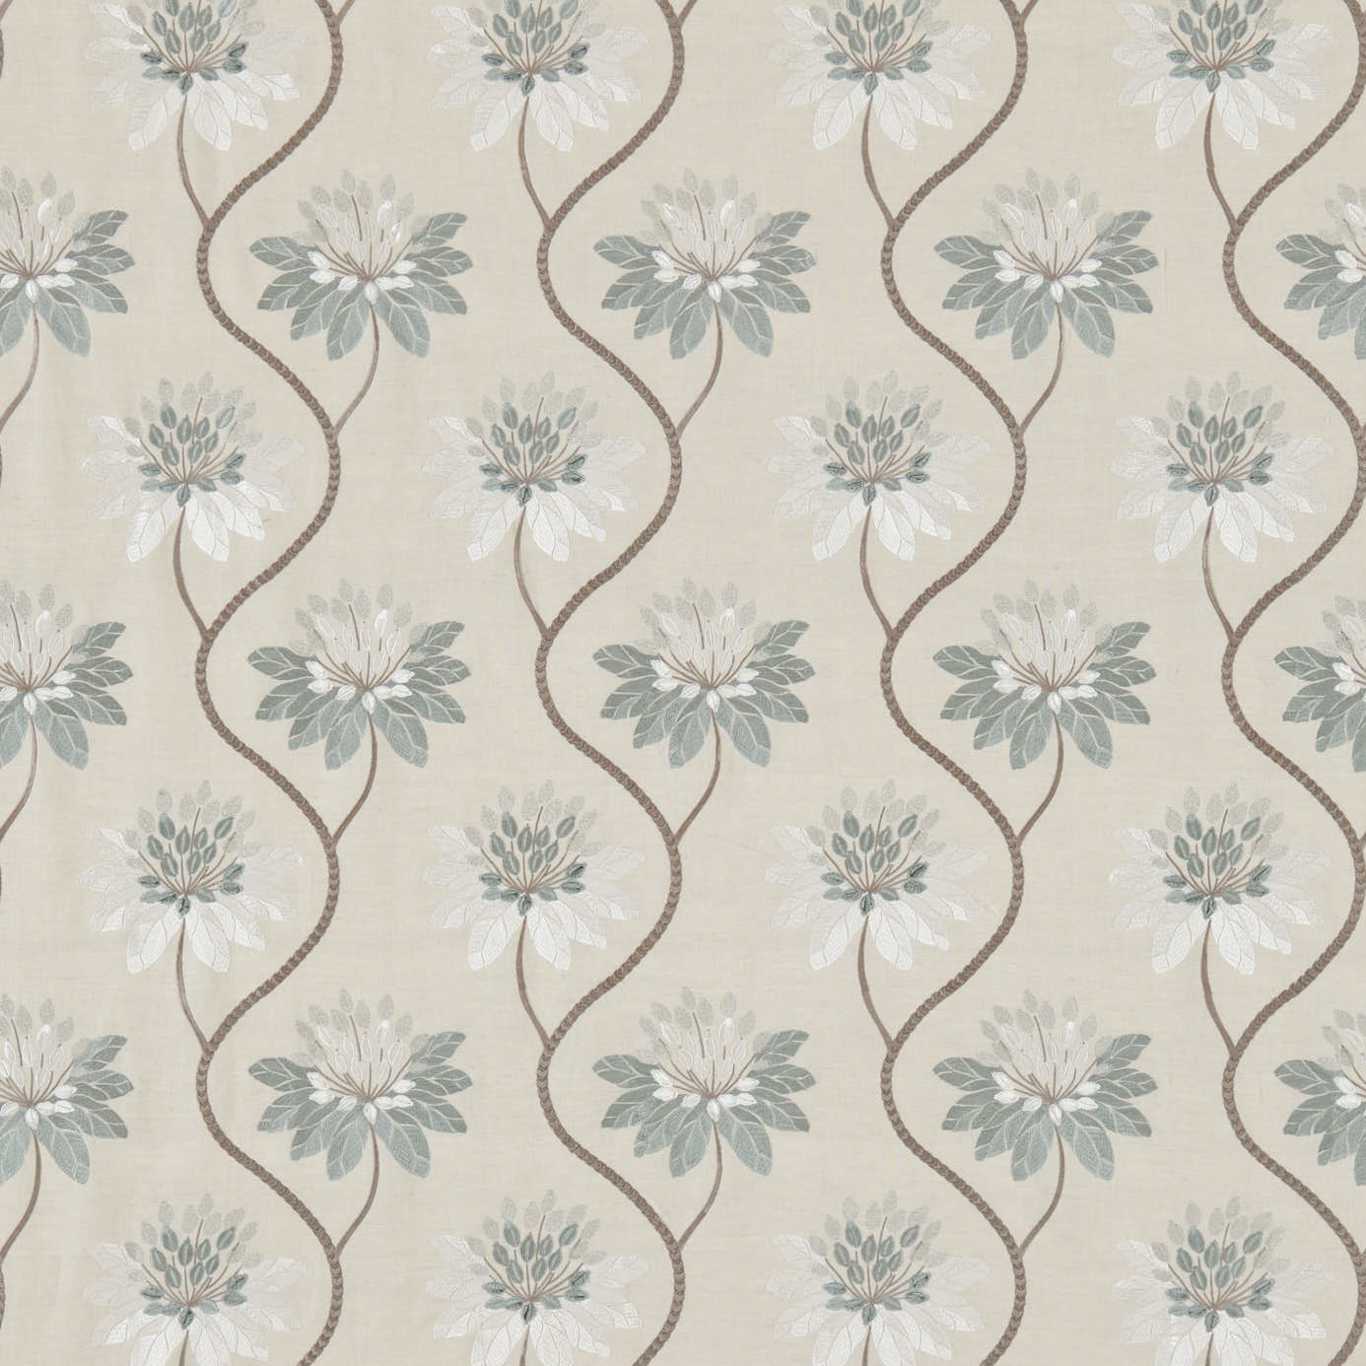 Eloise Willow Fabric by HAR